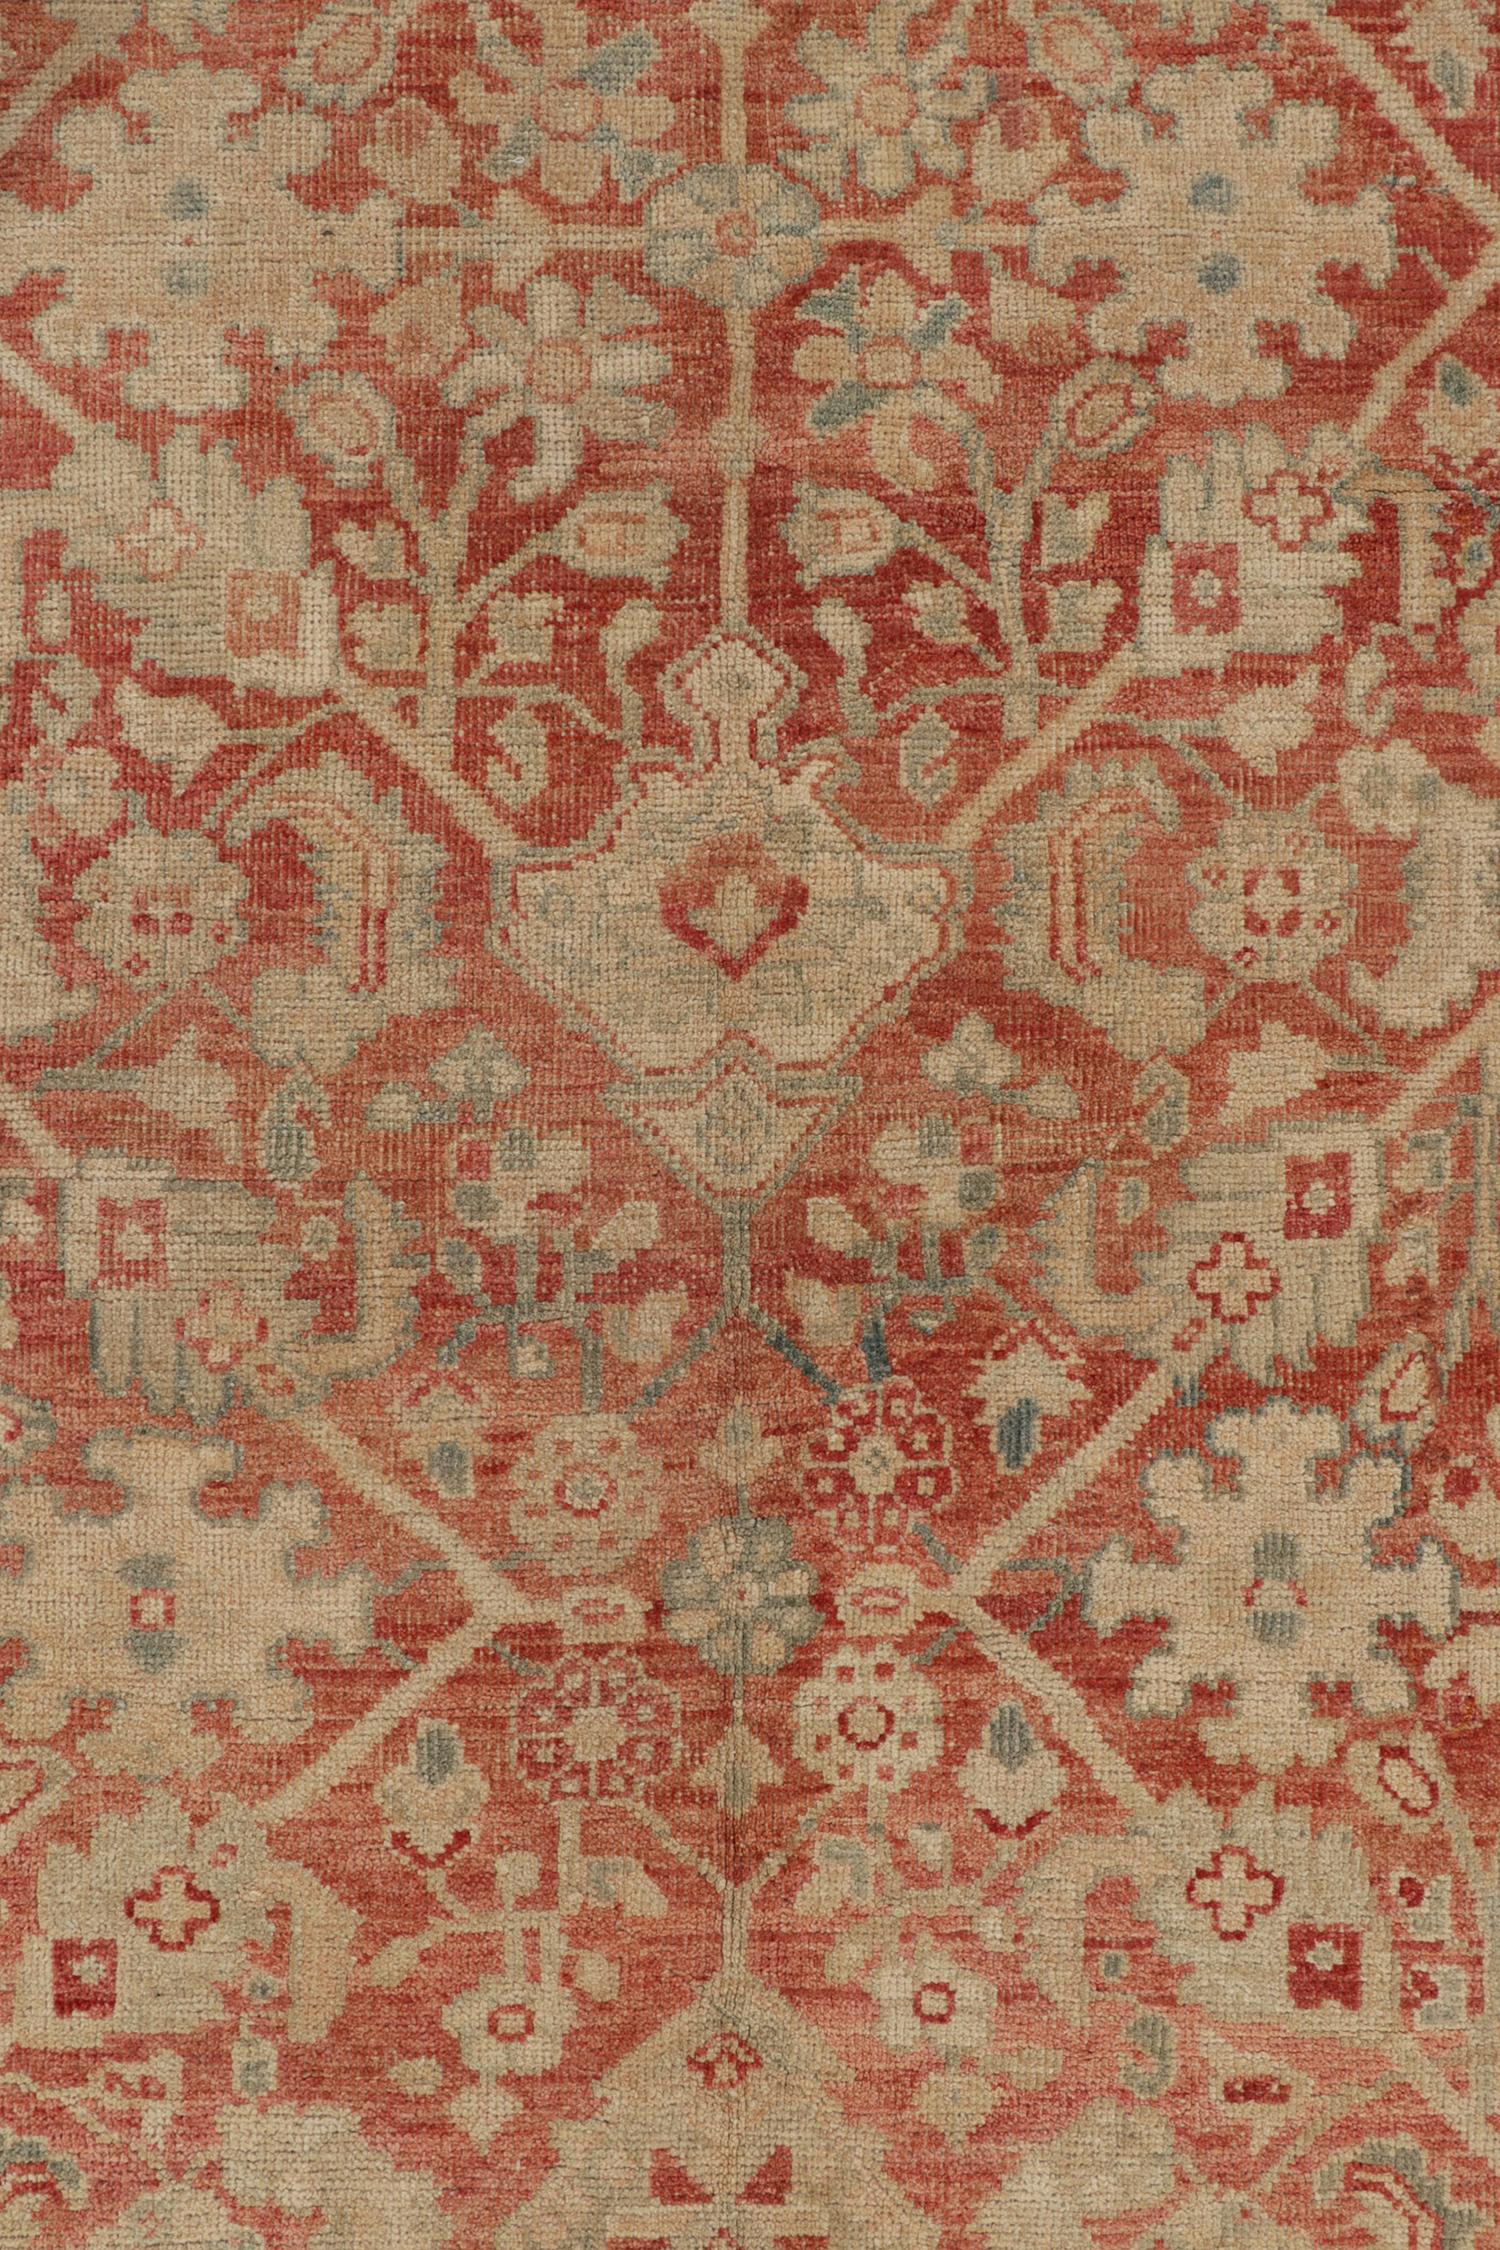 Early 20th Century Antique Tabriz Rug in Red & Beige-Brown Floral Pattern by Rug & Kilim For Sale